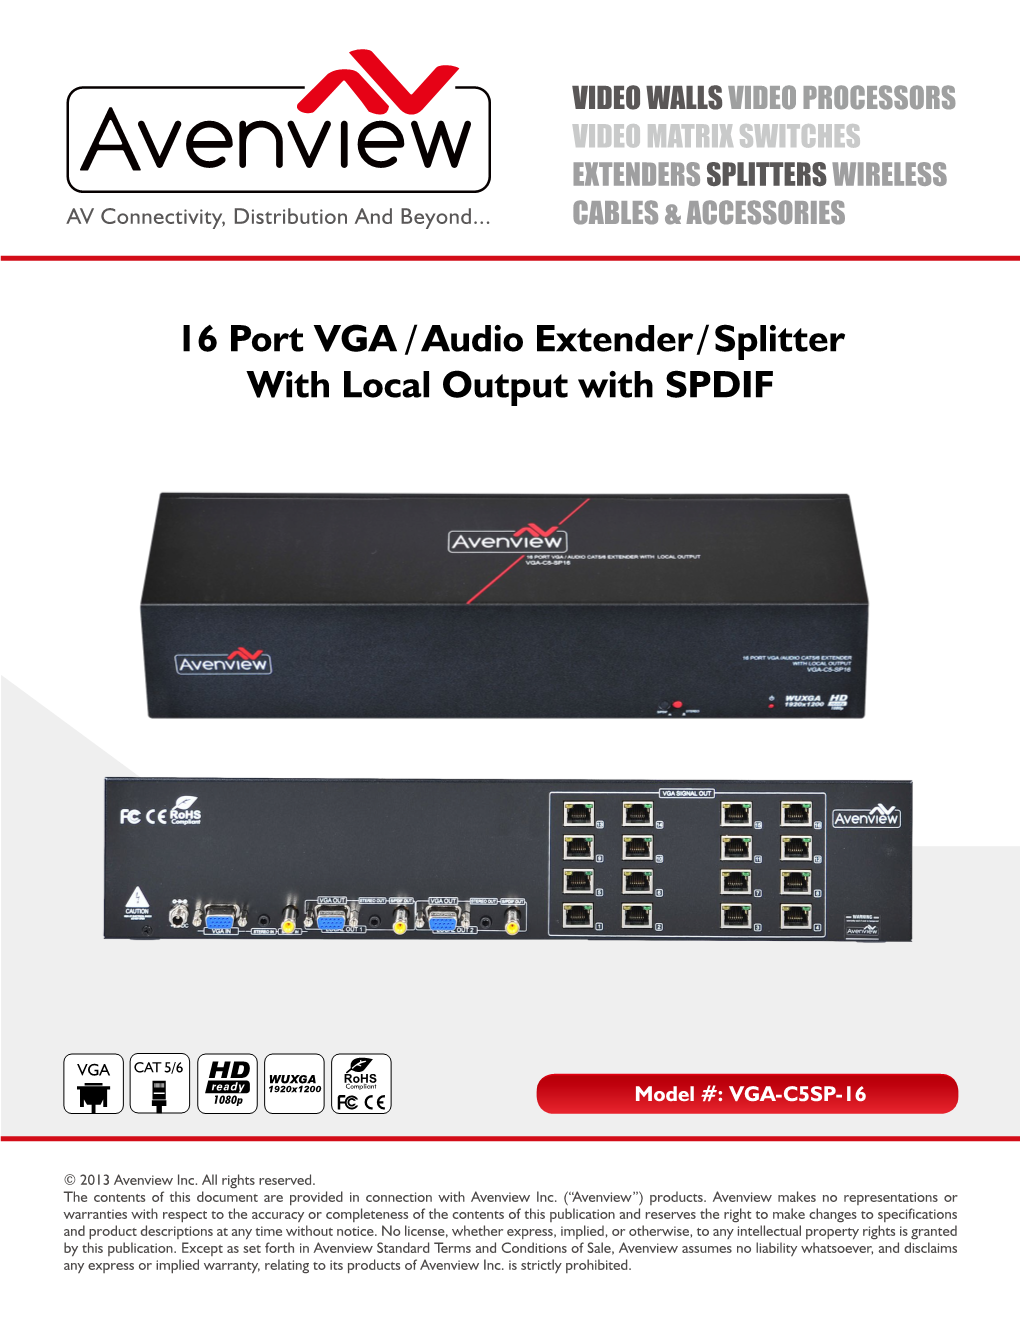 16 Port VGA / Audio Extender / Splitter with Local Output with SPDIF